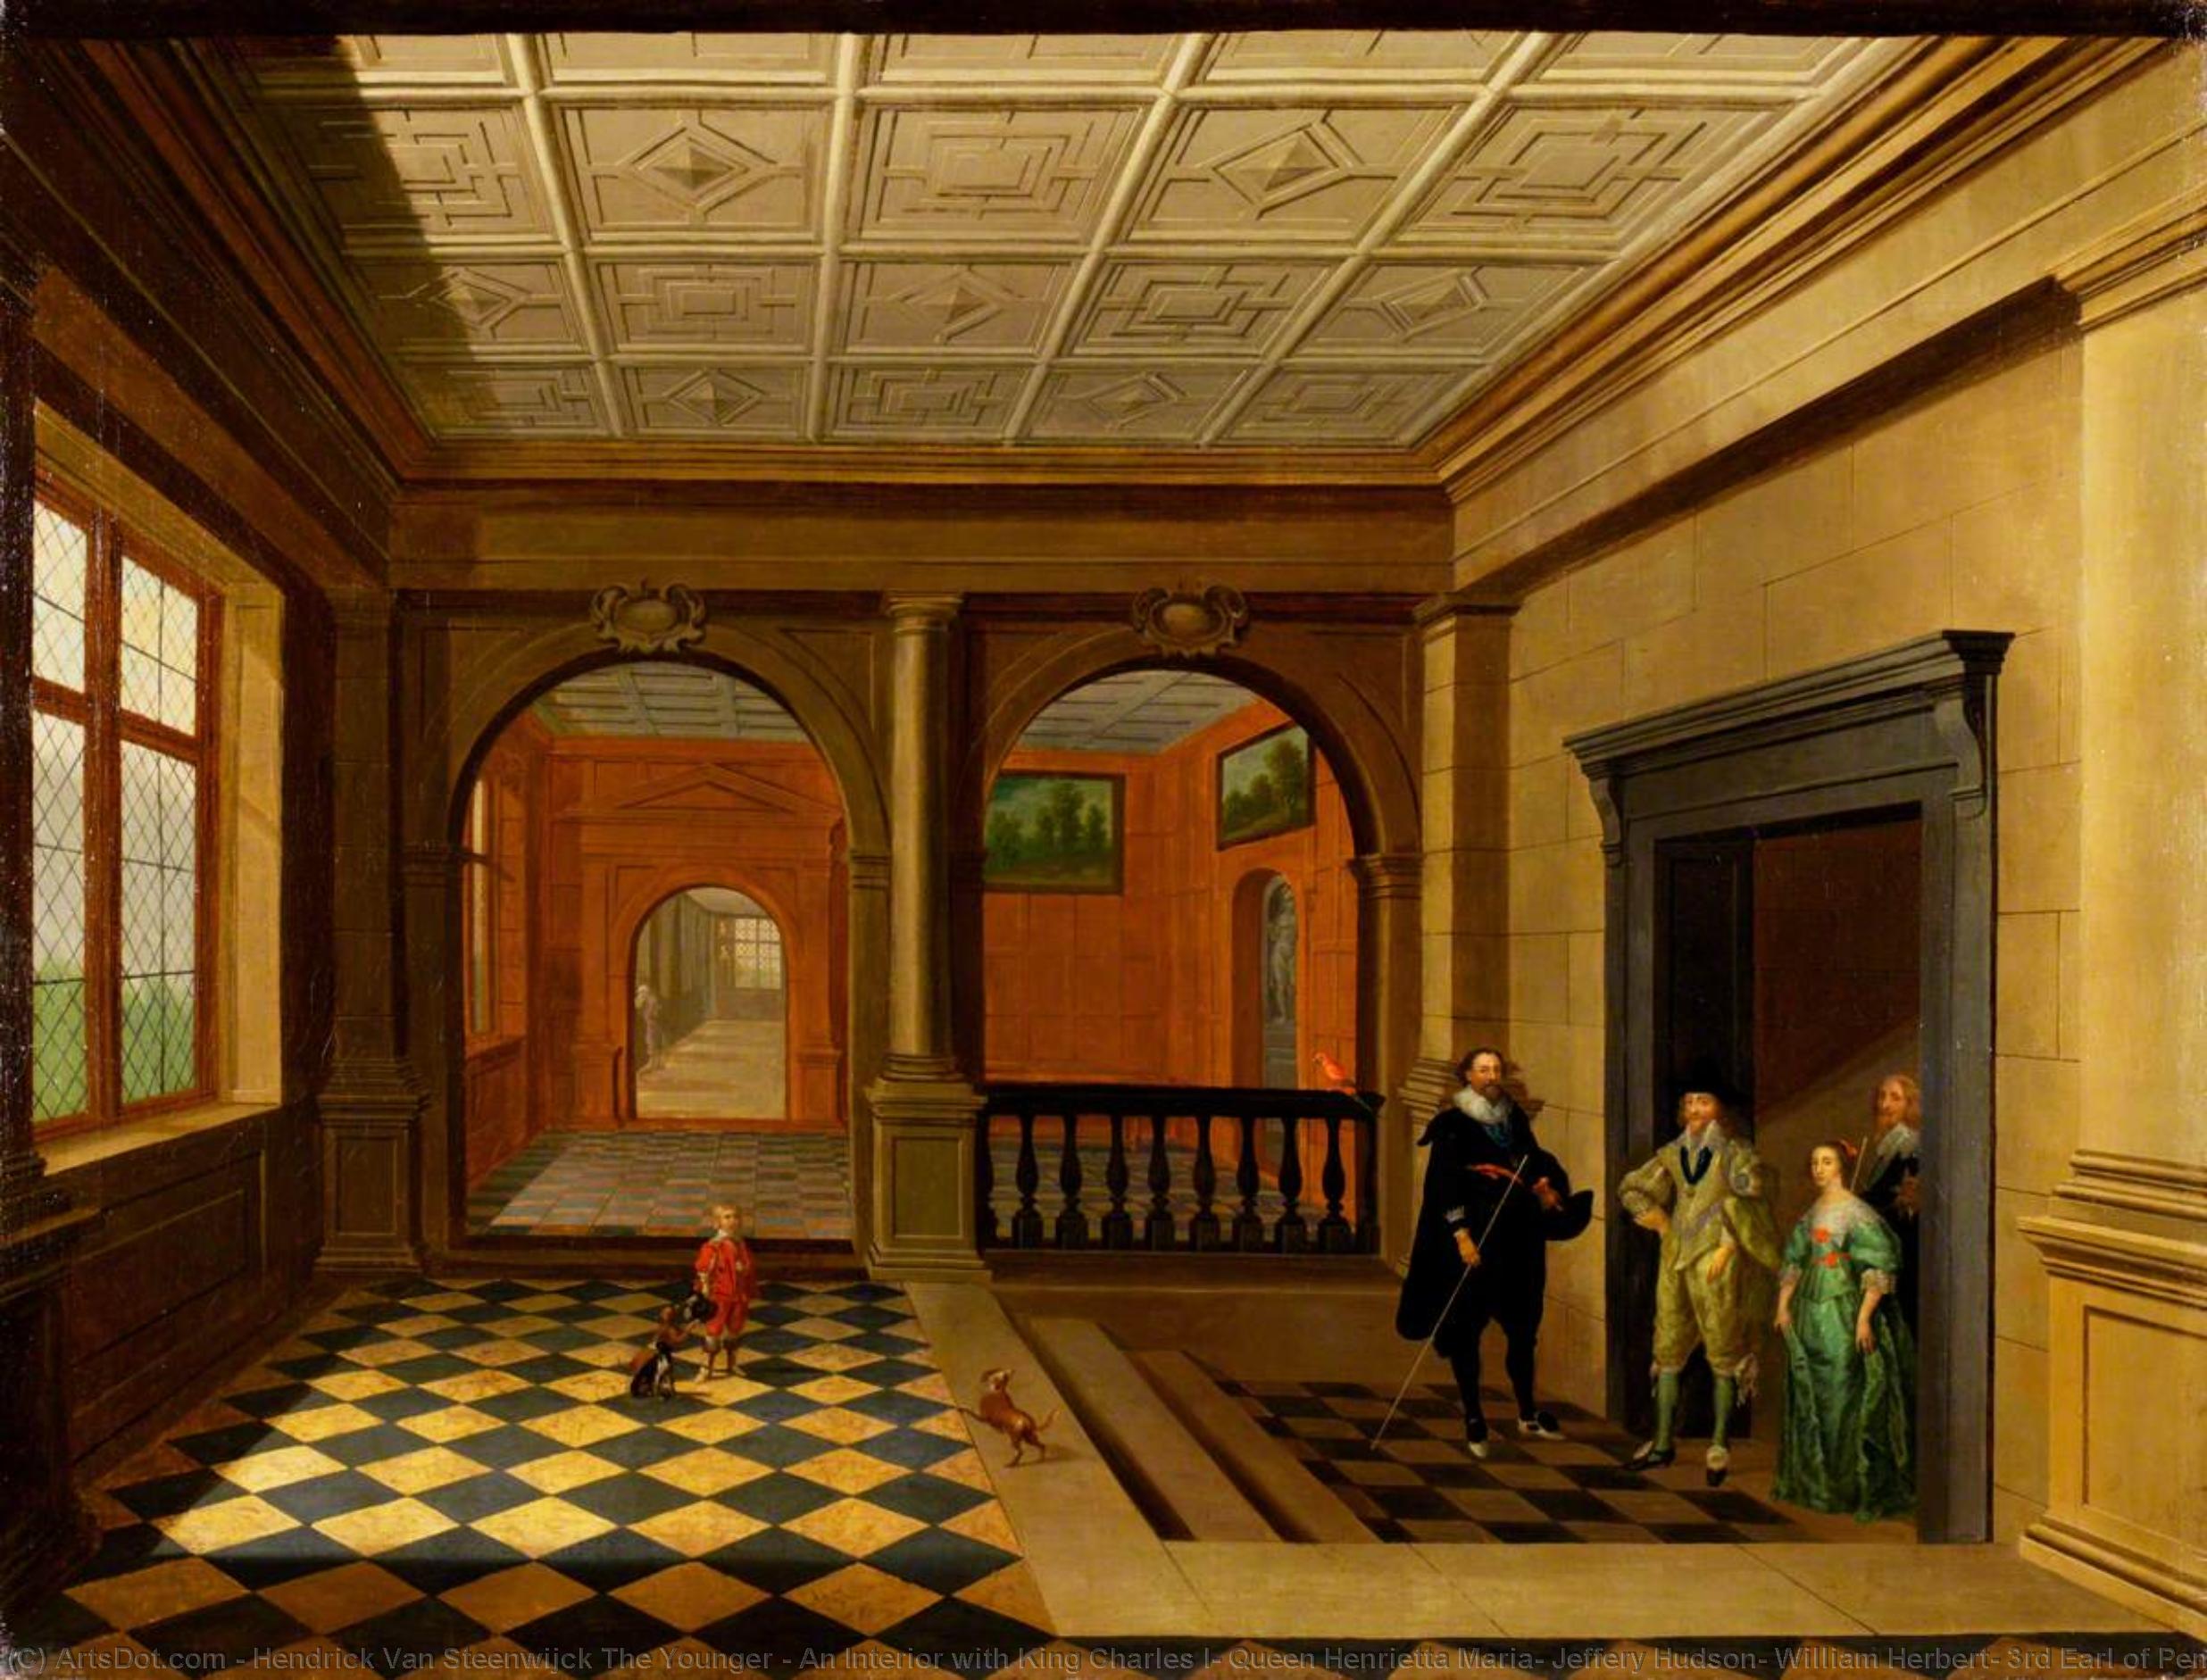 Wikioo.org - สารานุกรมวิจิตรศิลป์ - จิตรกรรม Hendrick Van Steenwijck The Younger - An Interior with King Charles I, Queen Henrietta Maria, Jeffery Hudson, William Herbert, 3rd Earl of Pembroke and His Brother Philip Herbert (later 4th Earl of Pembroke)